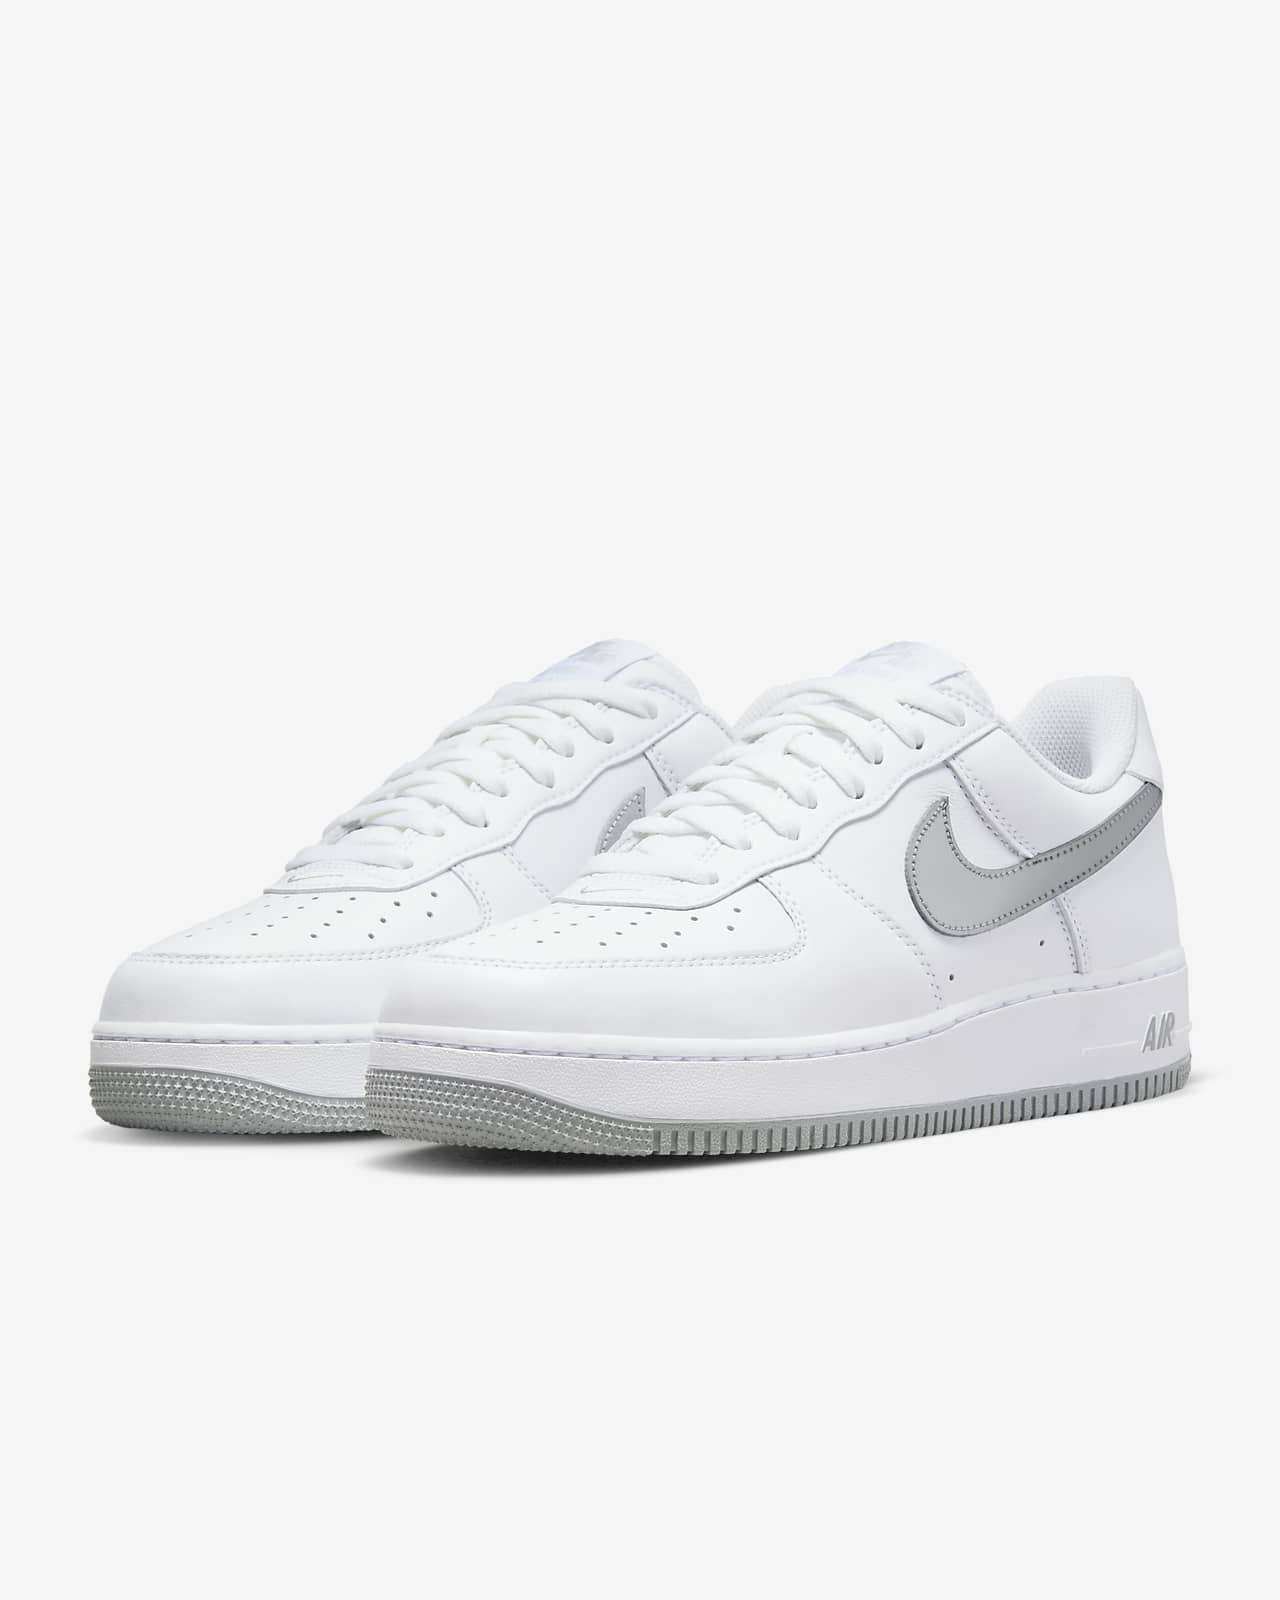 mens nike air force 1 all for 1 stores